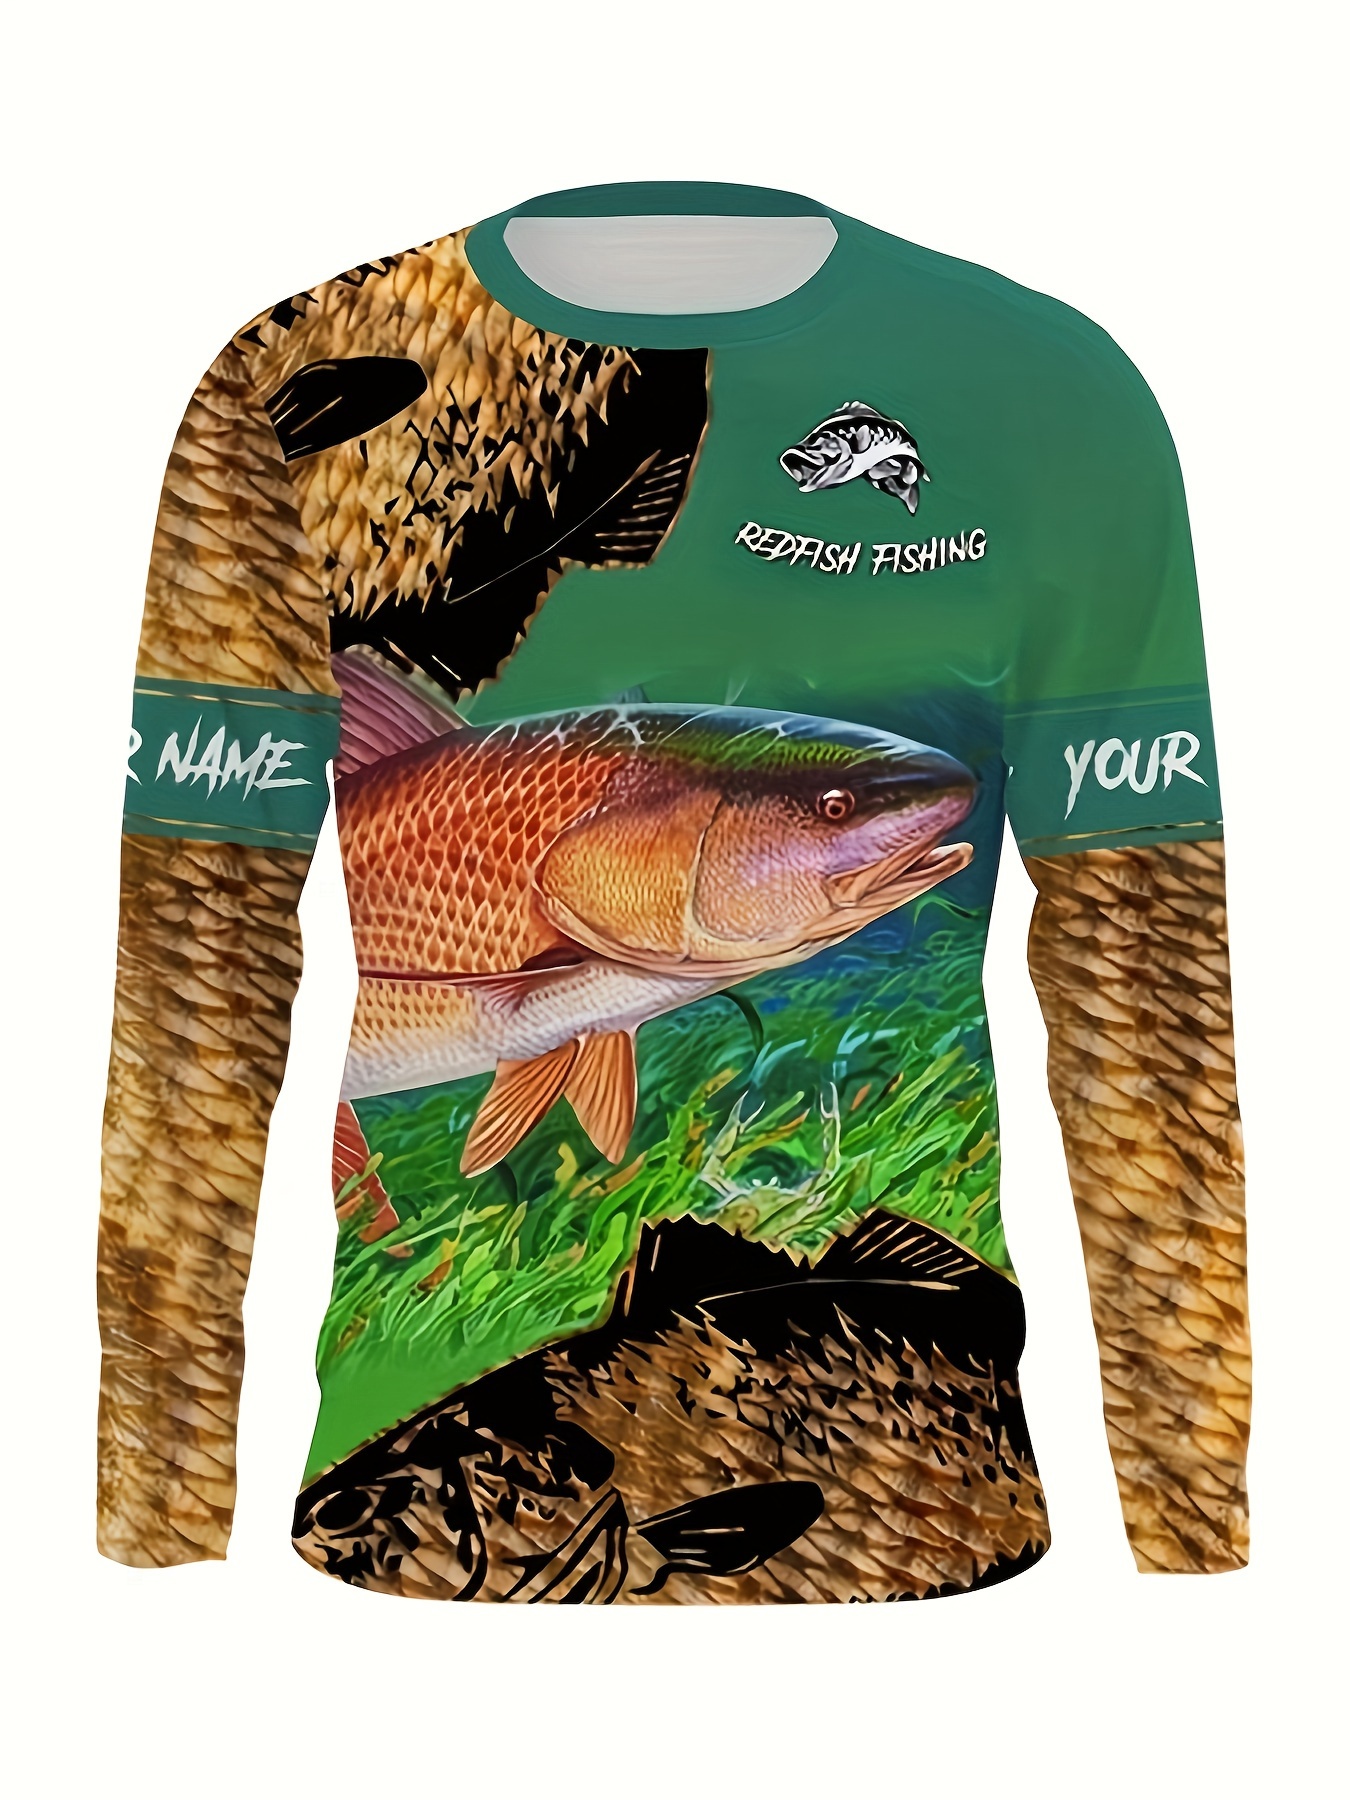 Fish Print Long Sleeve Fishing Shirts & Pants For Men, 2pieces Novelty Pjs  Tops Pullovers Tops & Trousers Set, Men's Trendy Clothing